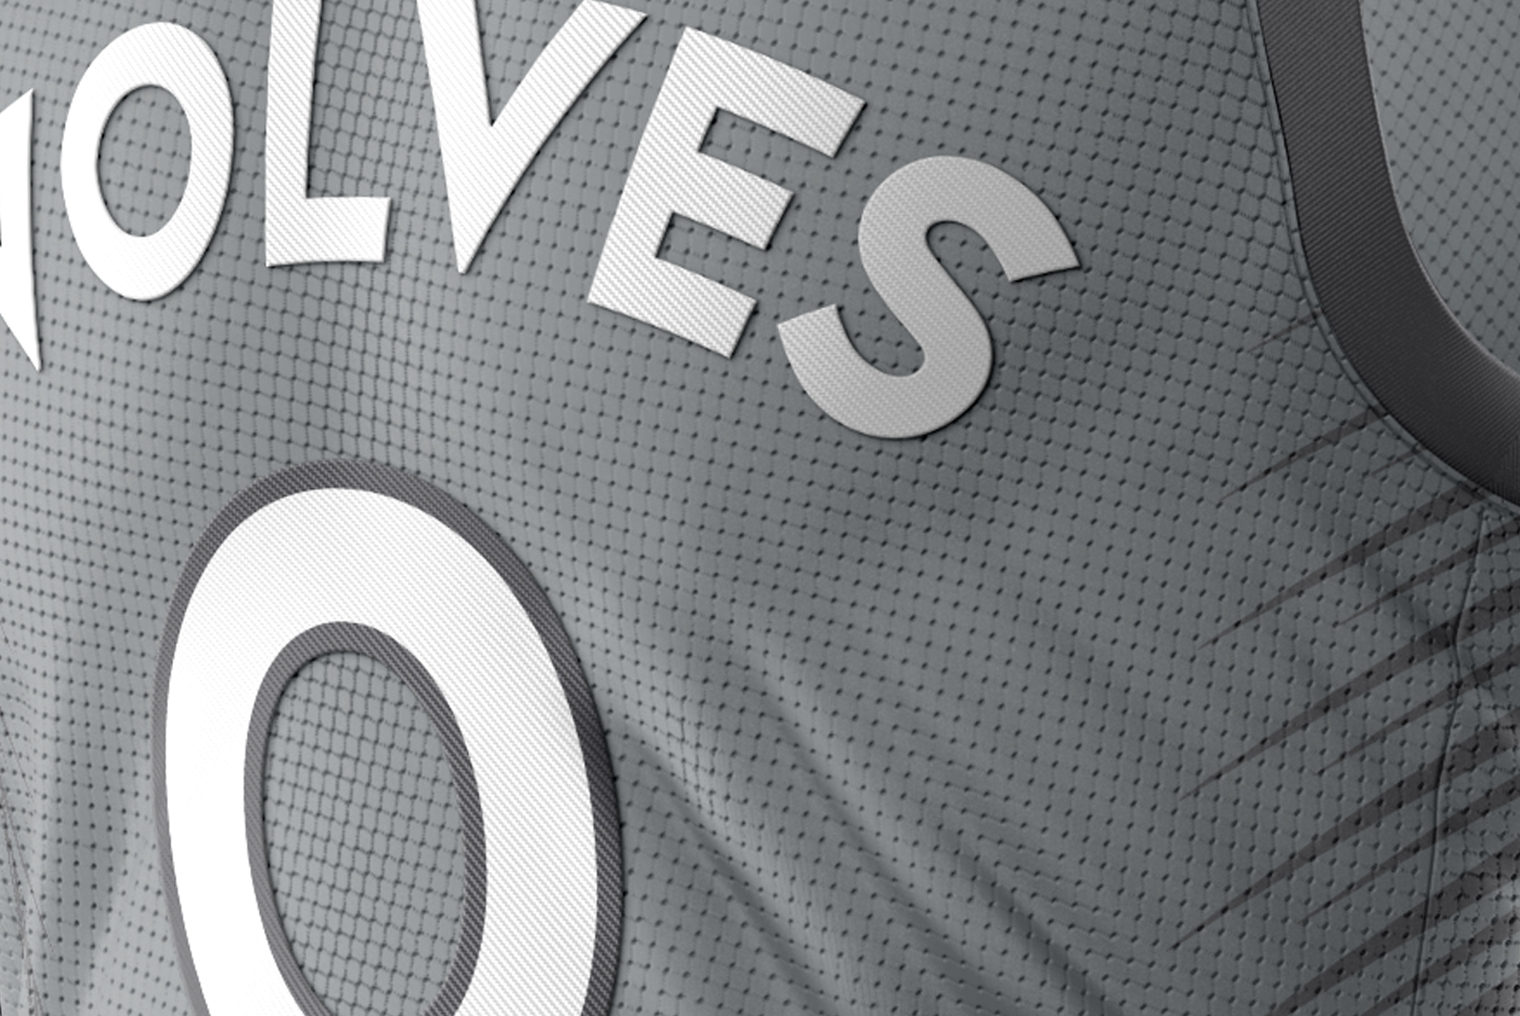 Timberwolves' unveil new City Edition uniforms: 'The goal is to be bold' -  The Athletic